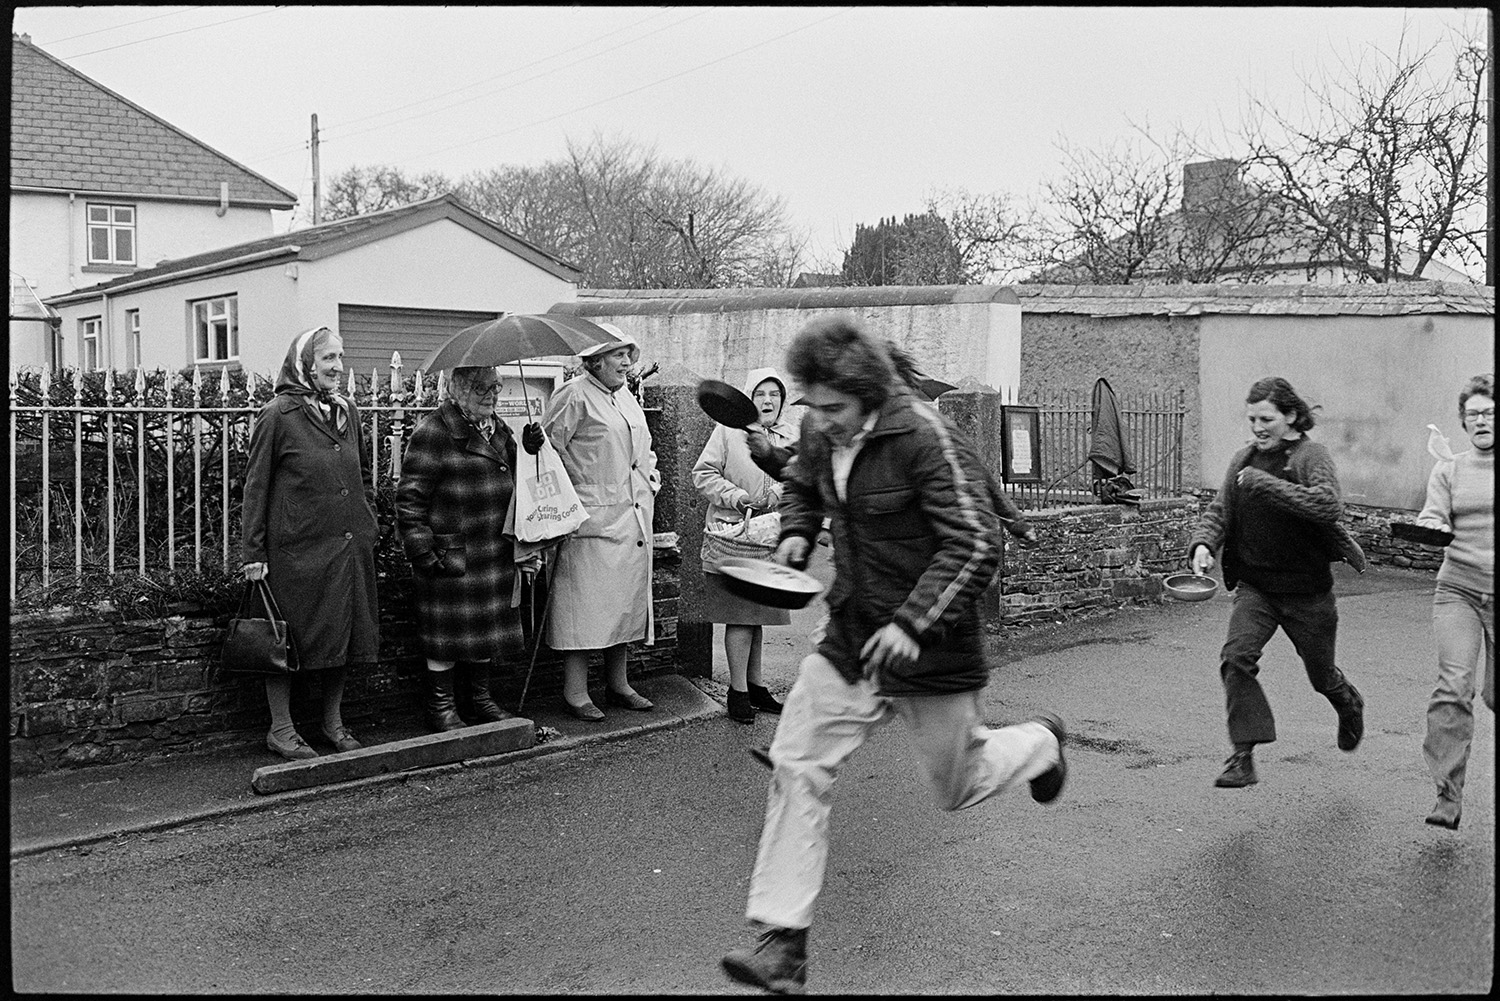 Getting ready for Pancake race in village street and having race. 
[Men and women taking part in a pancake race through a street in Dolton on Shrove Tuesday. A group of women are watching the race from the side of the street.]